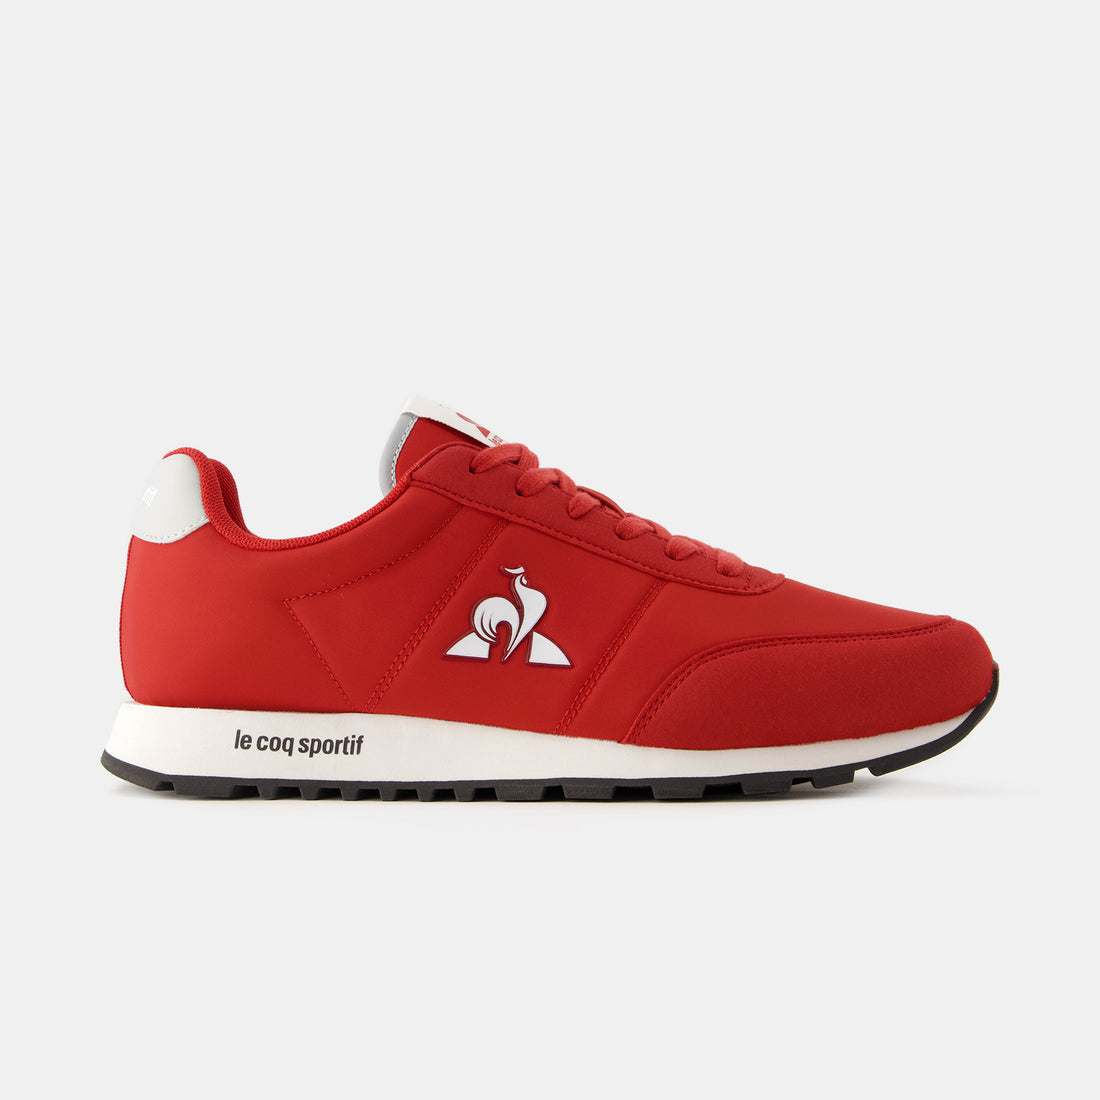 2410497-RACERONE_2 pompeian red | Chaussures RACERONE_2 Homme